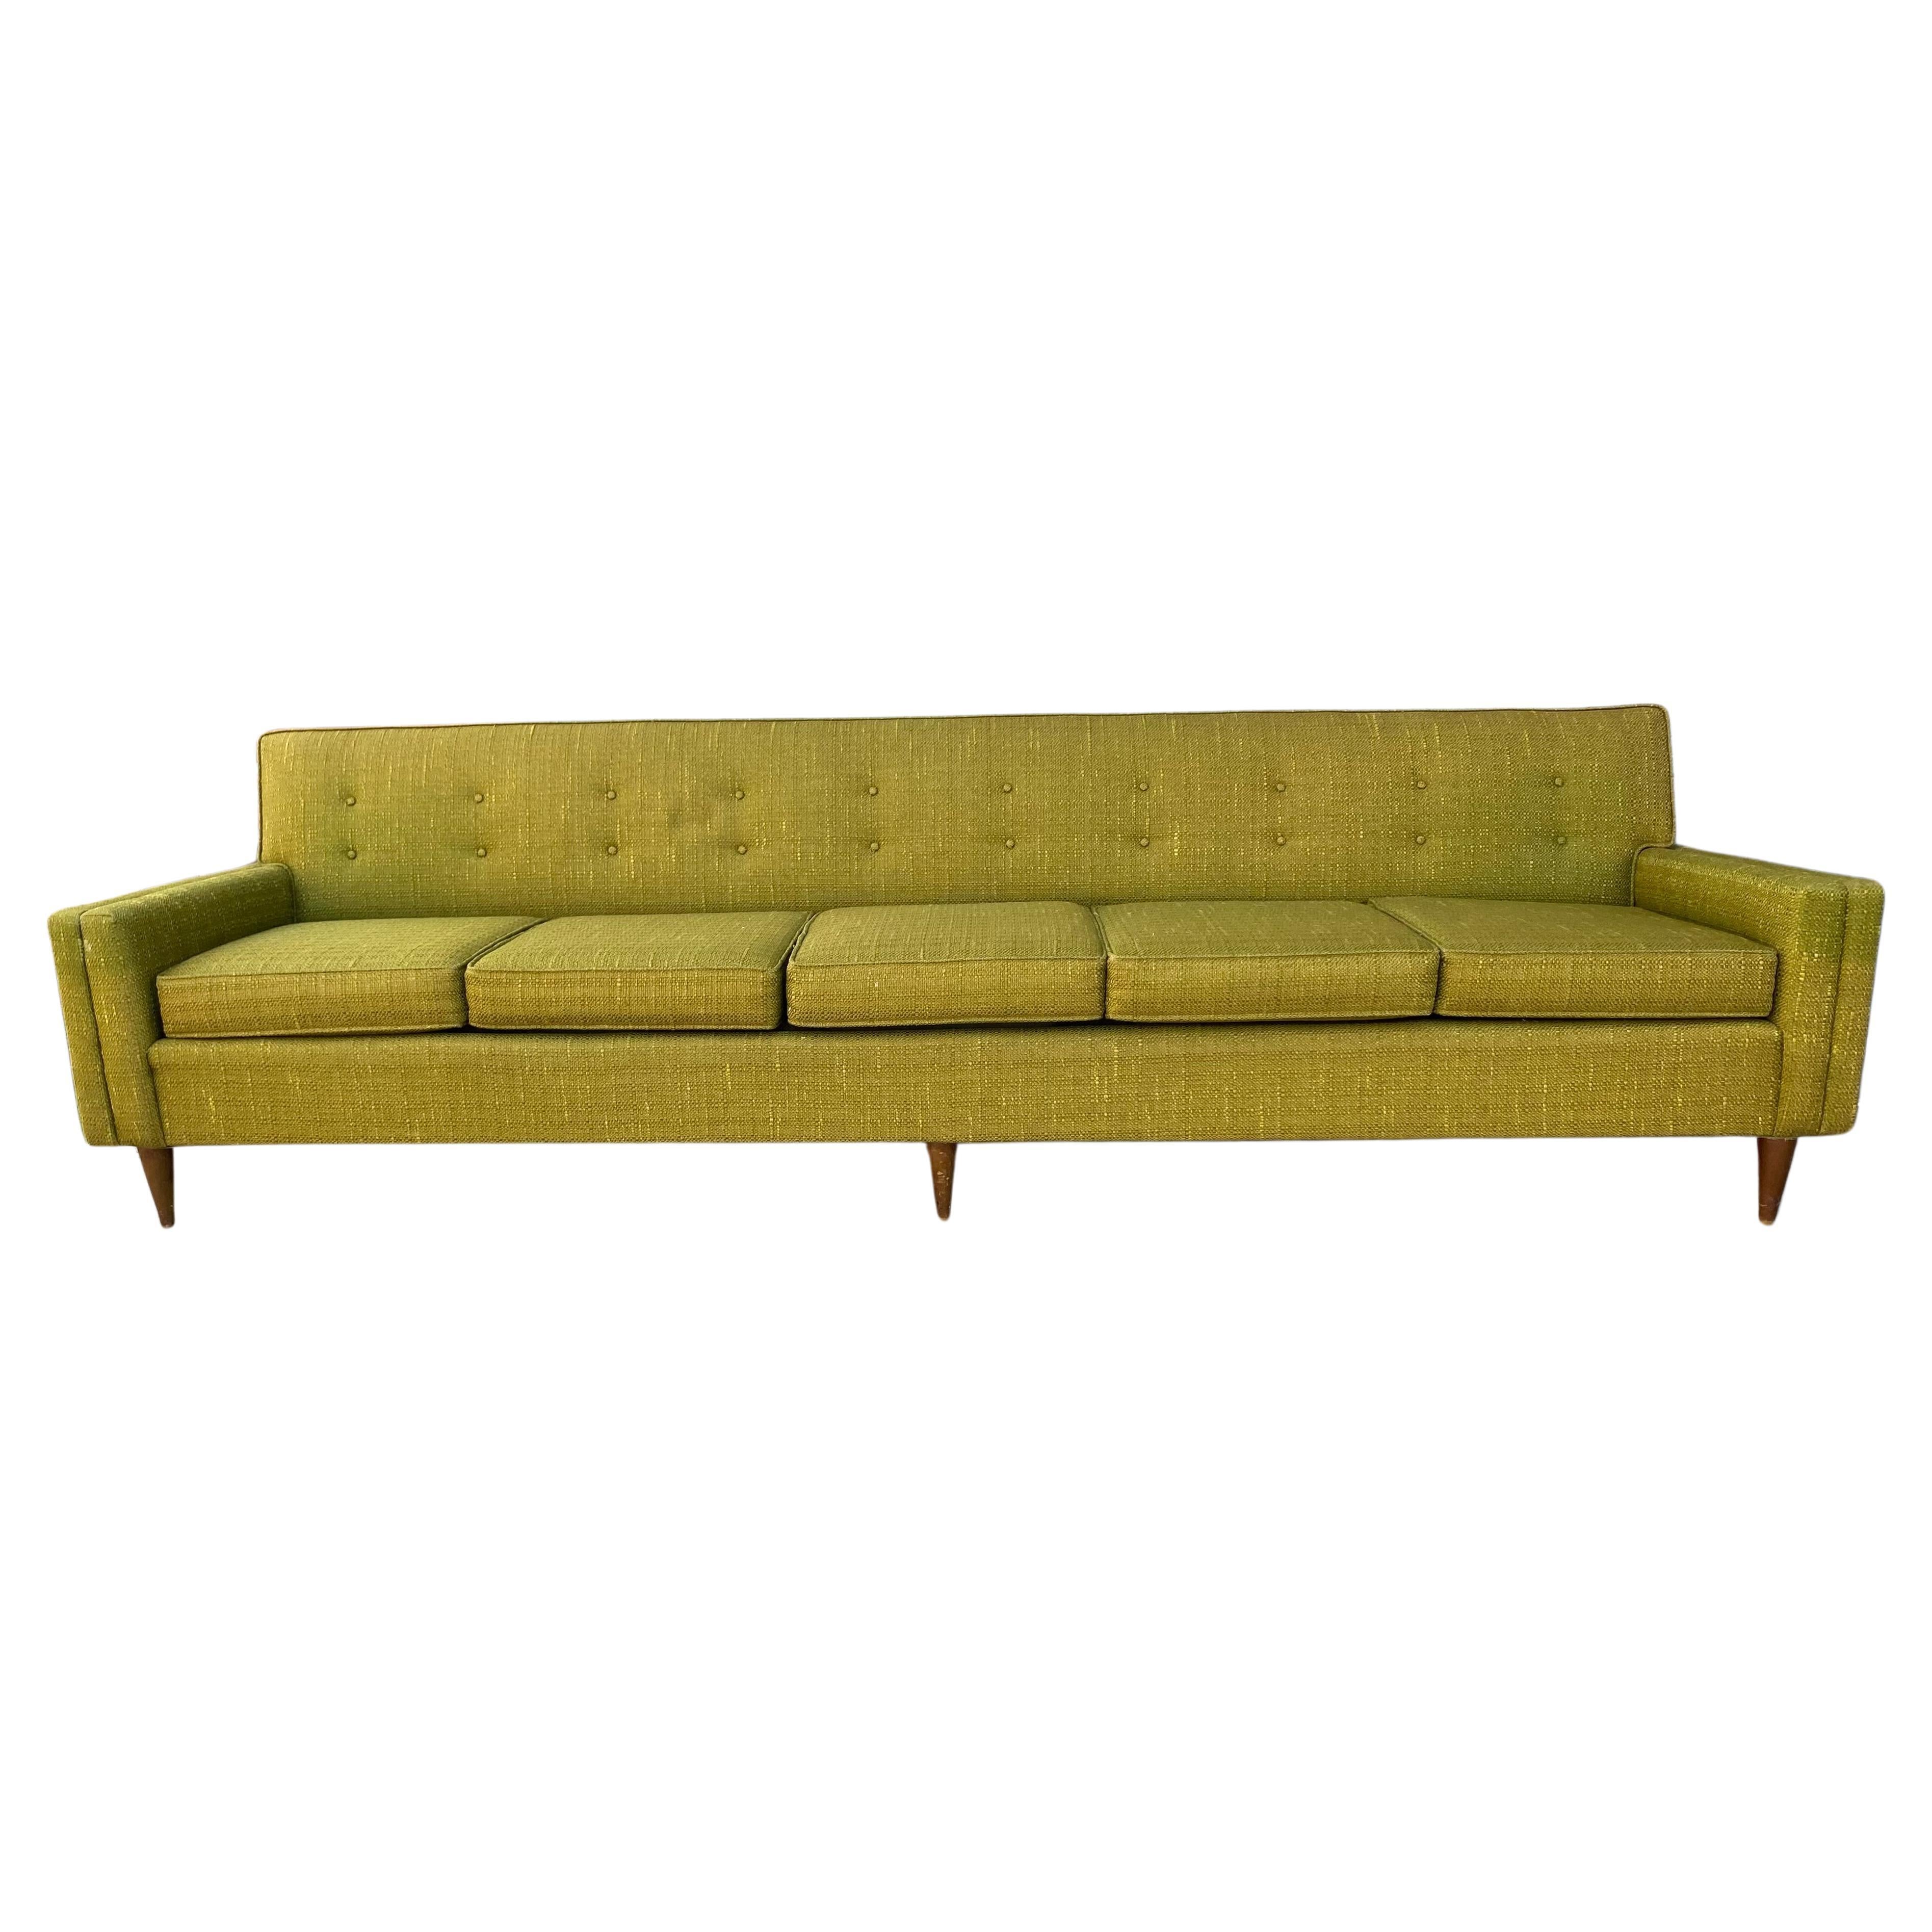 Classic Modernist 110 inch "Long" Sofa attributed to Paul McCobb For Sale